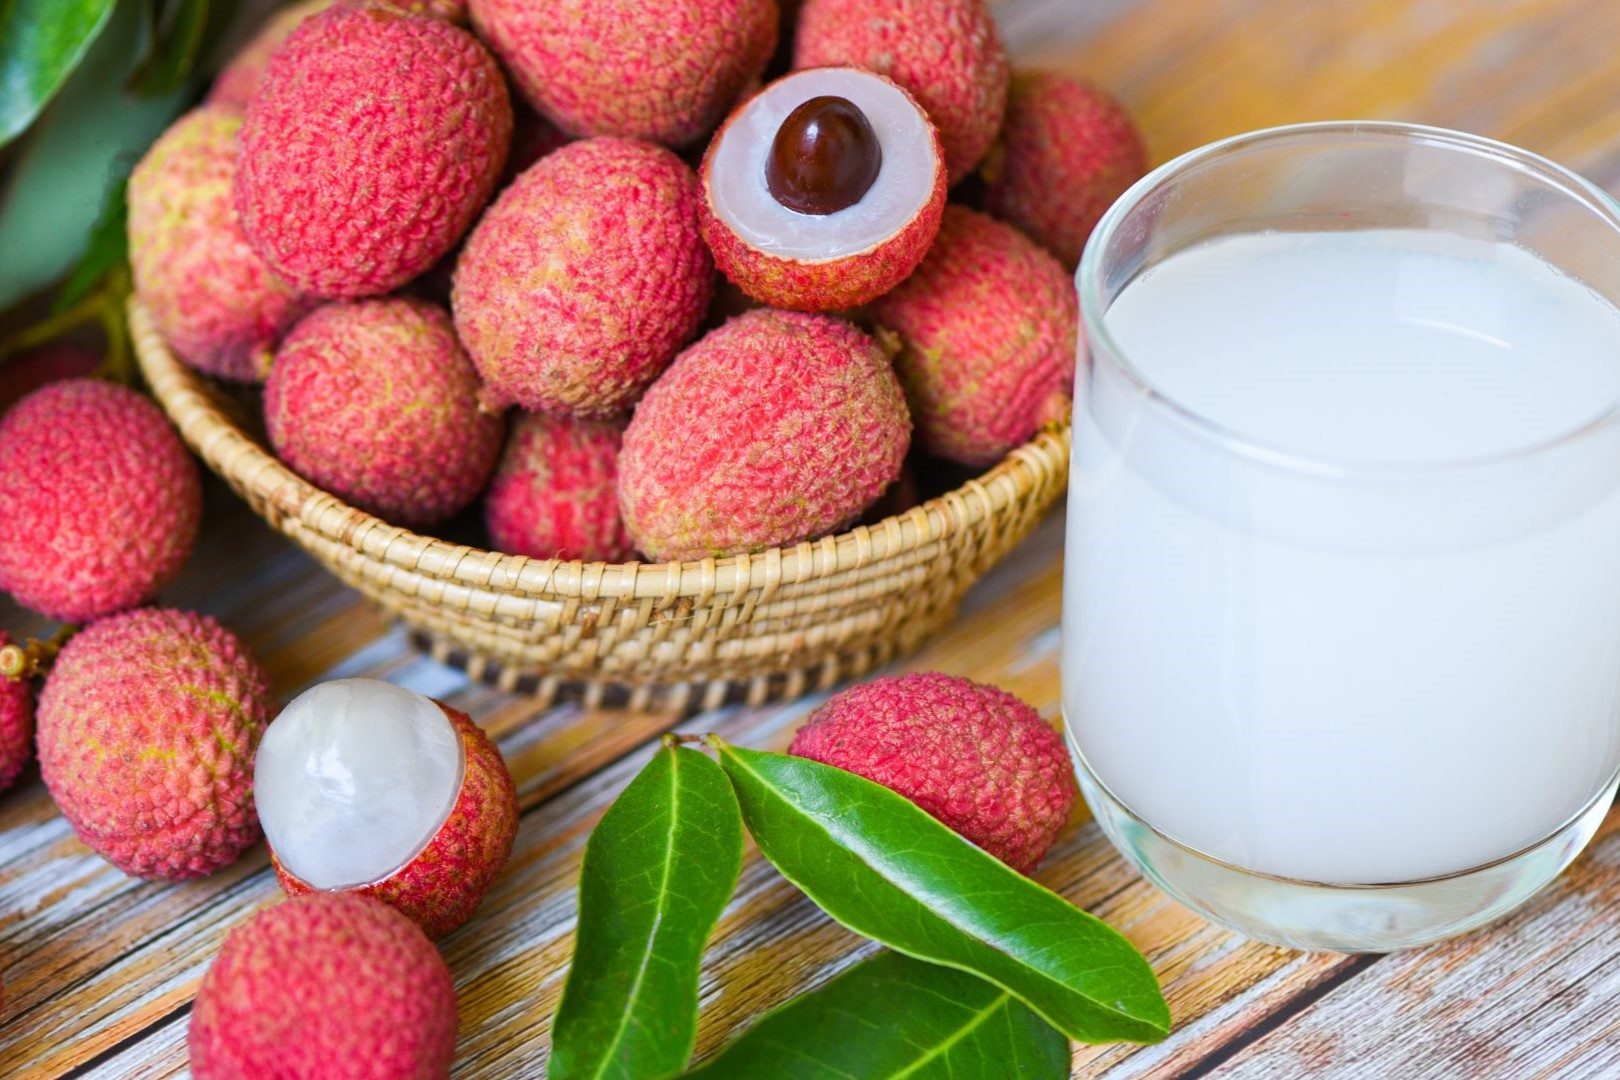 Discover The Surprising Truth About Lychees: Why Some Love Them And Others Can't Stand Them!